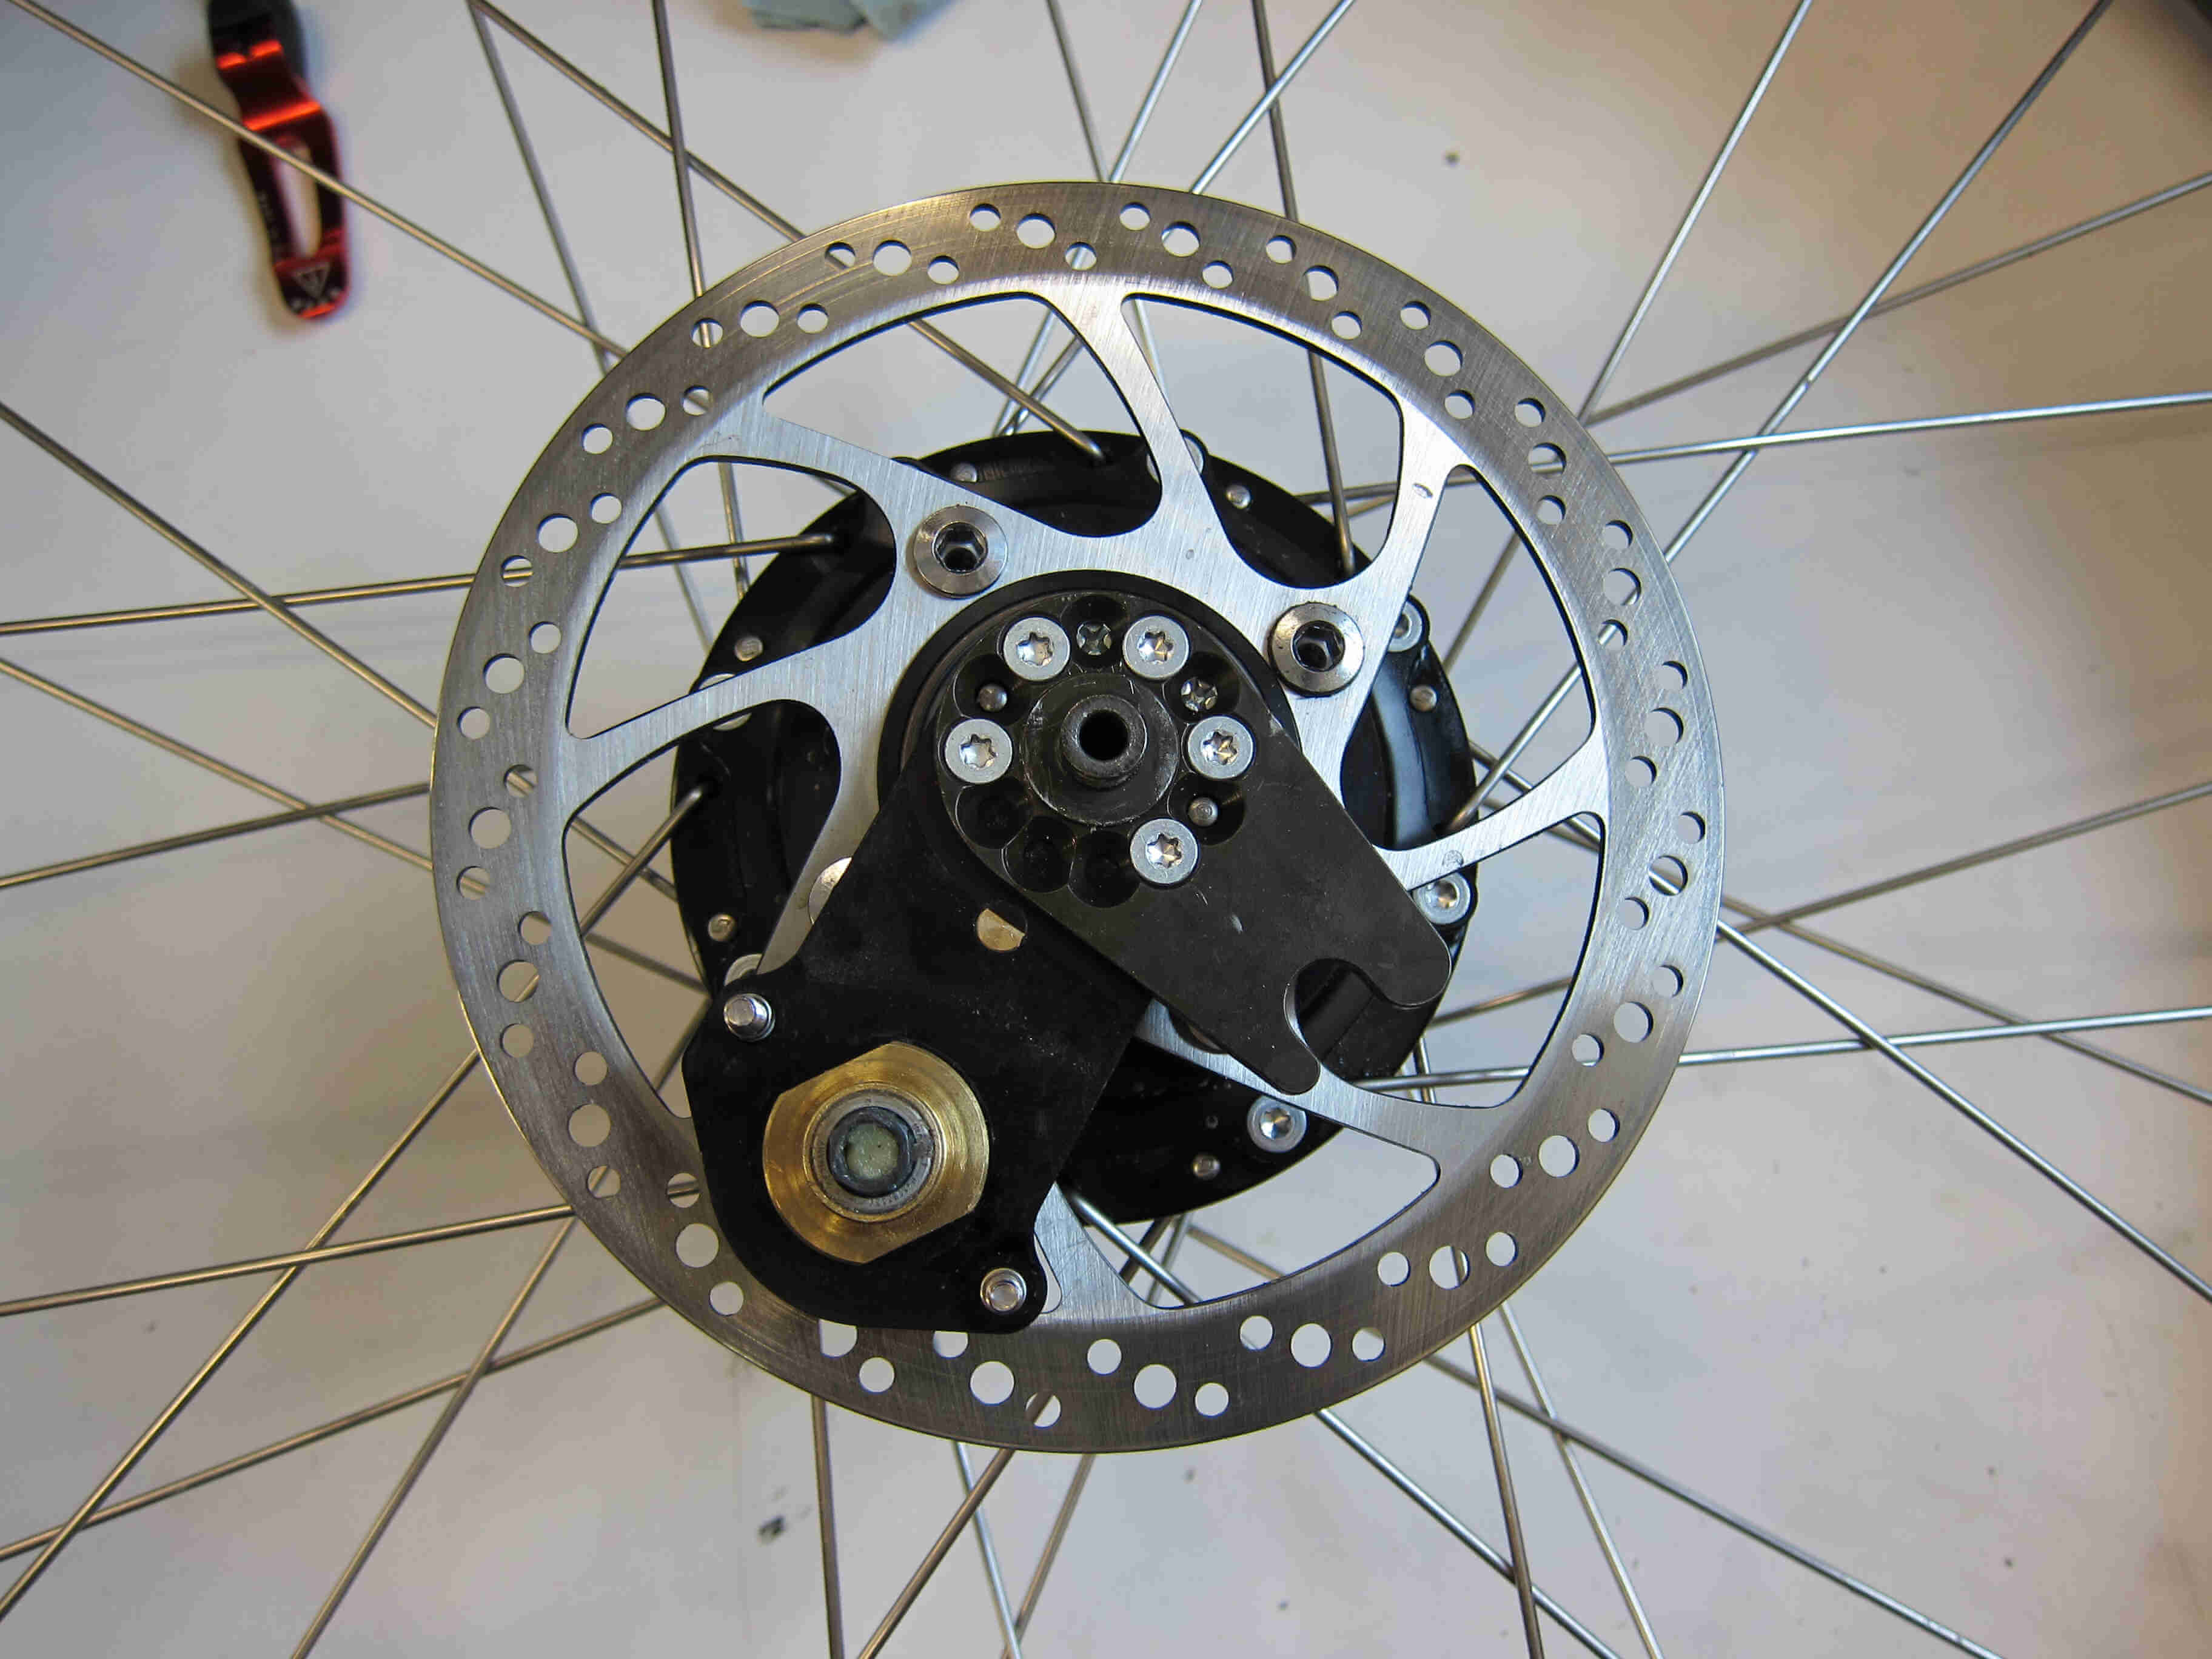 Downward view of a Rohloff bike hub with spokes and a brake disc attached